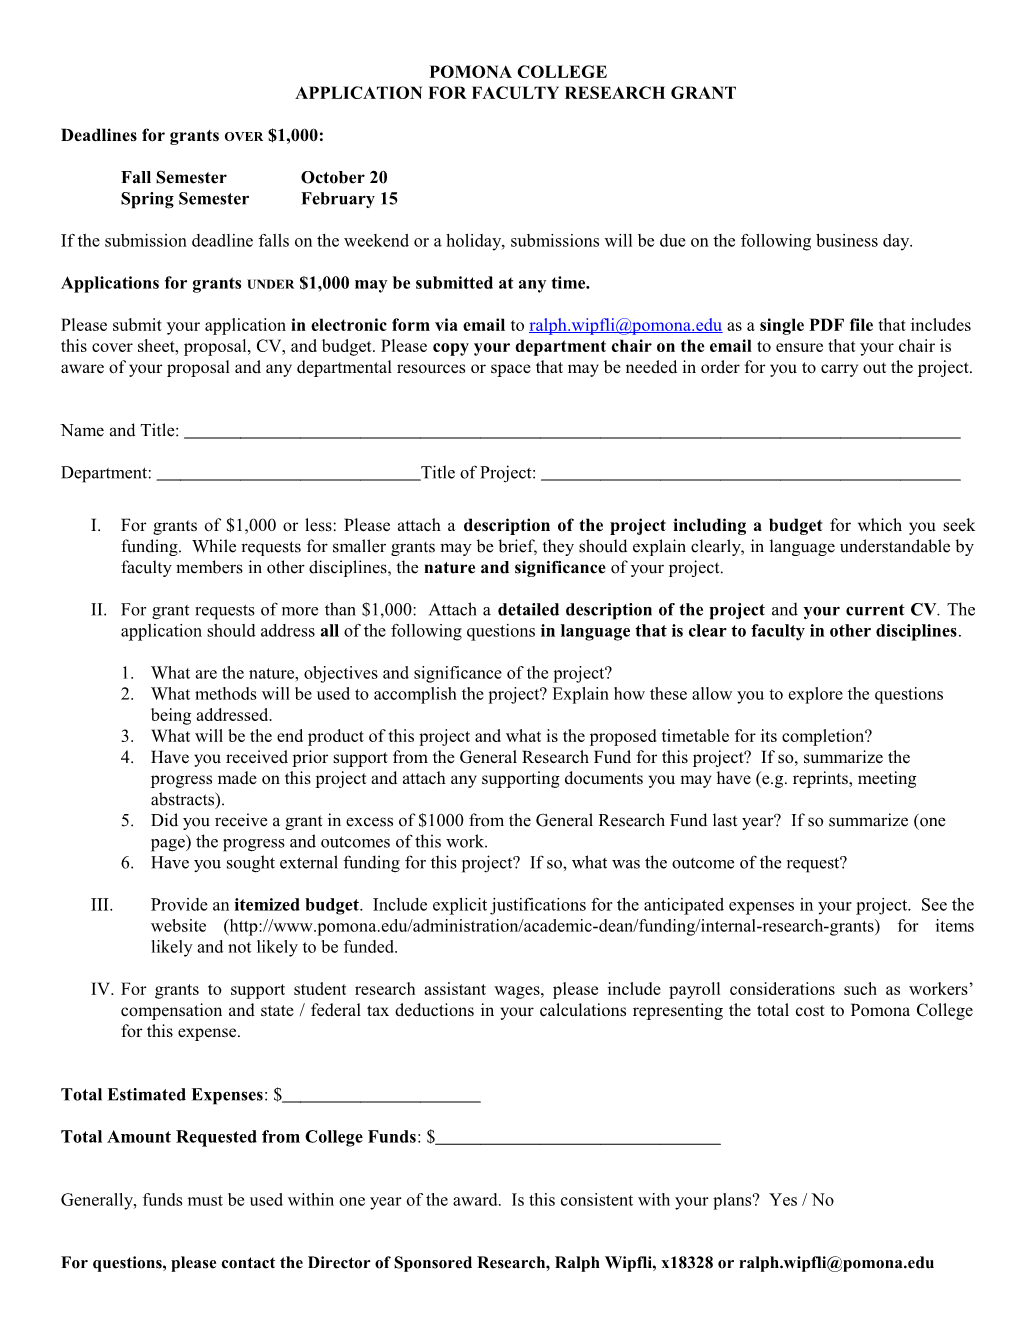 Application for Faculty Research Grant 2003-2004